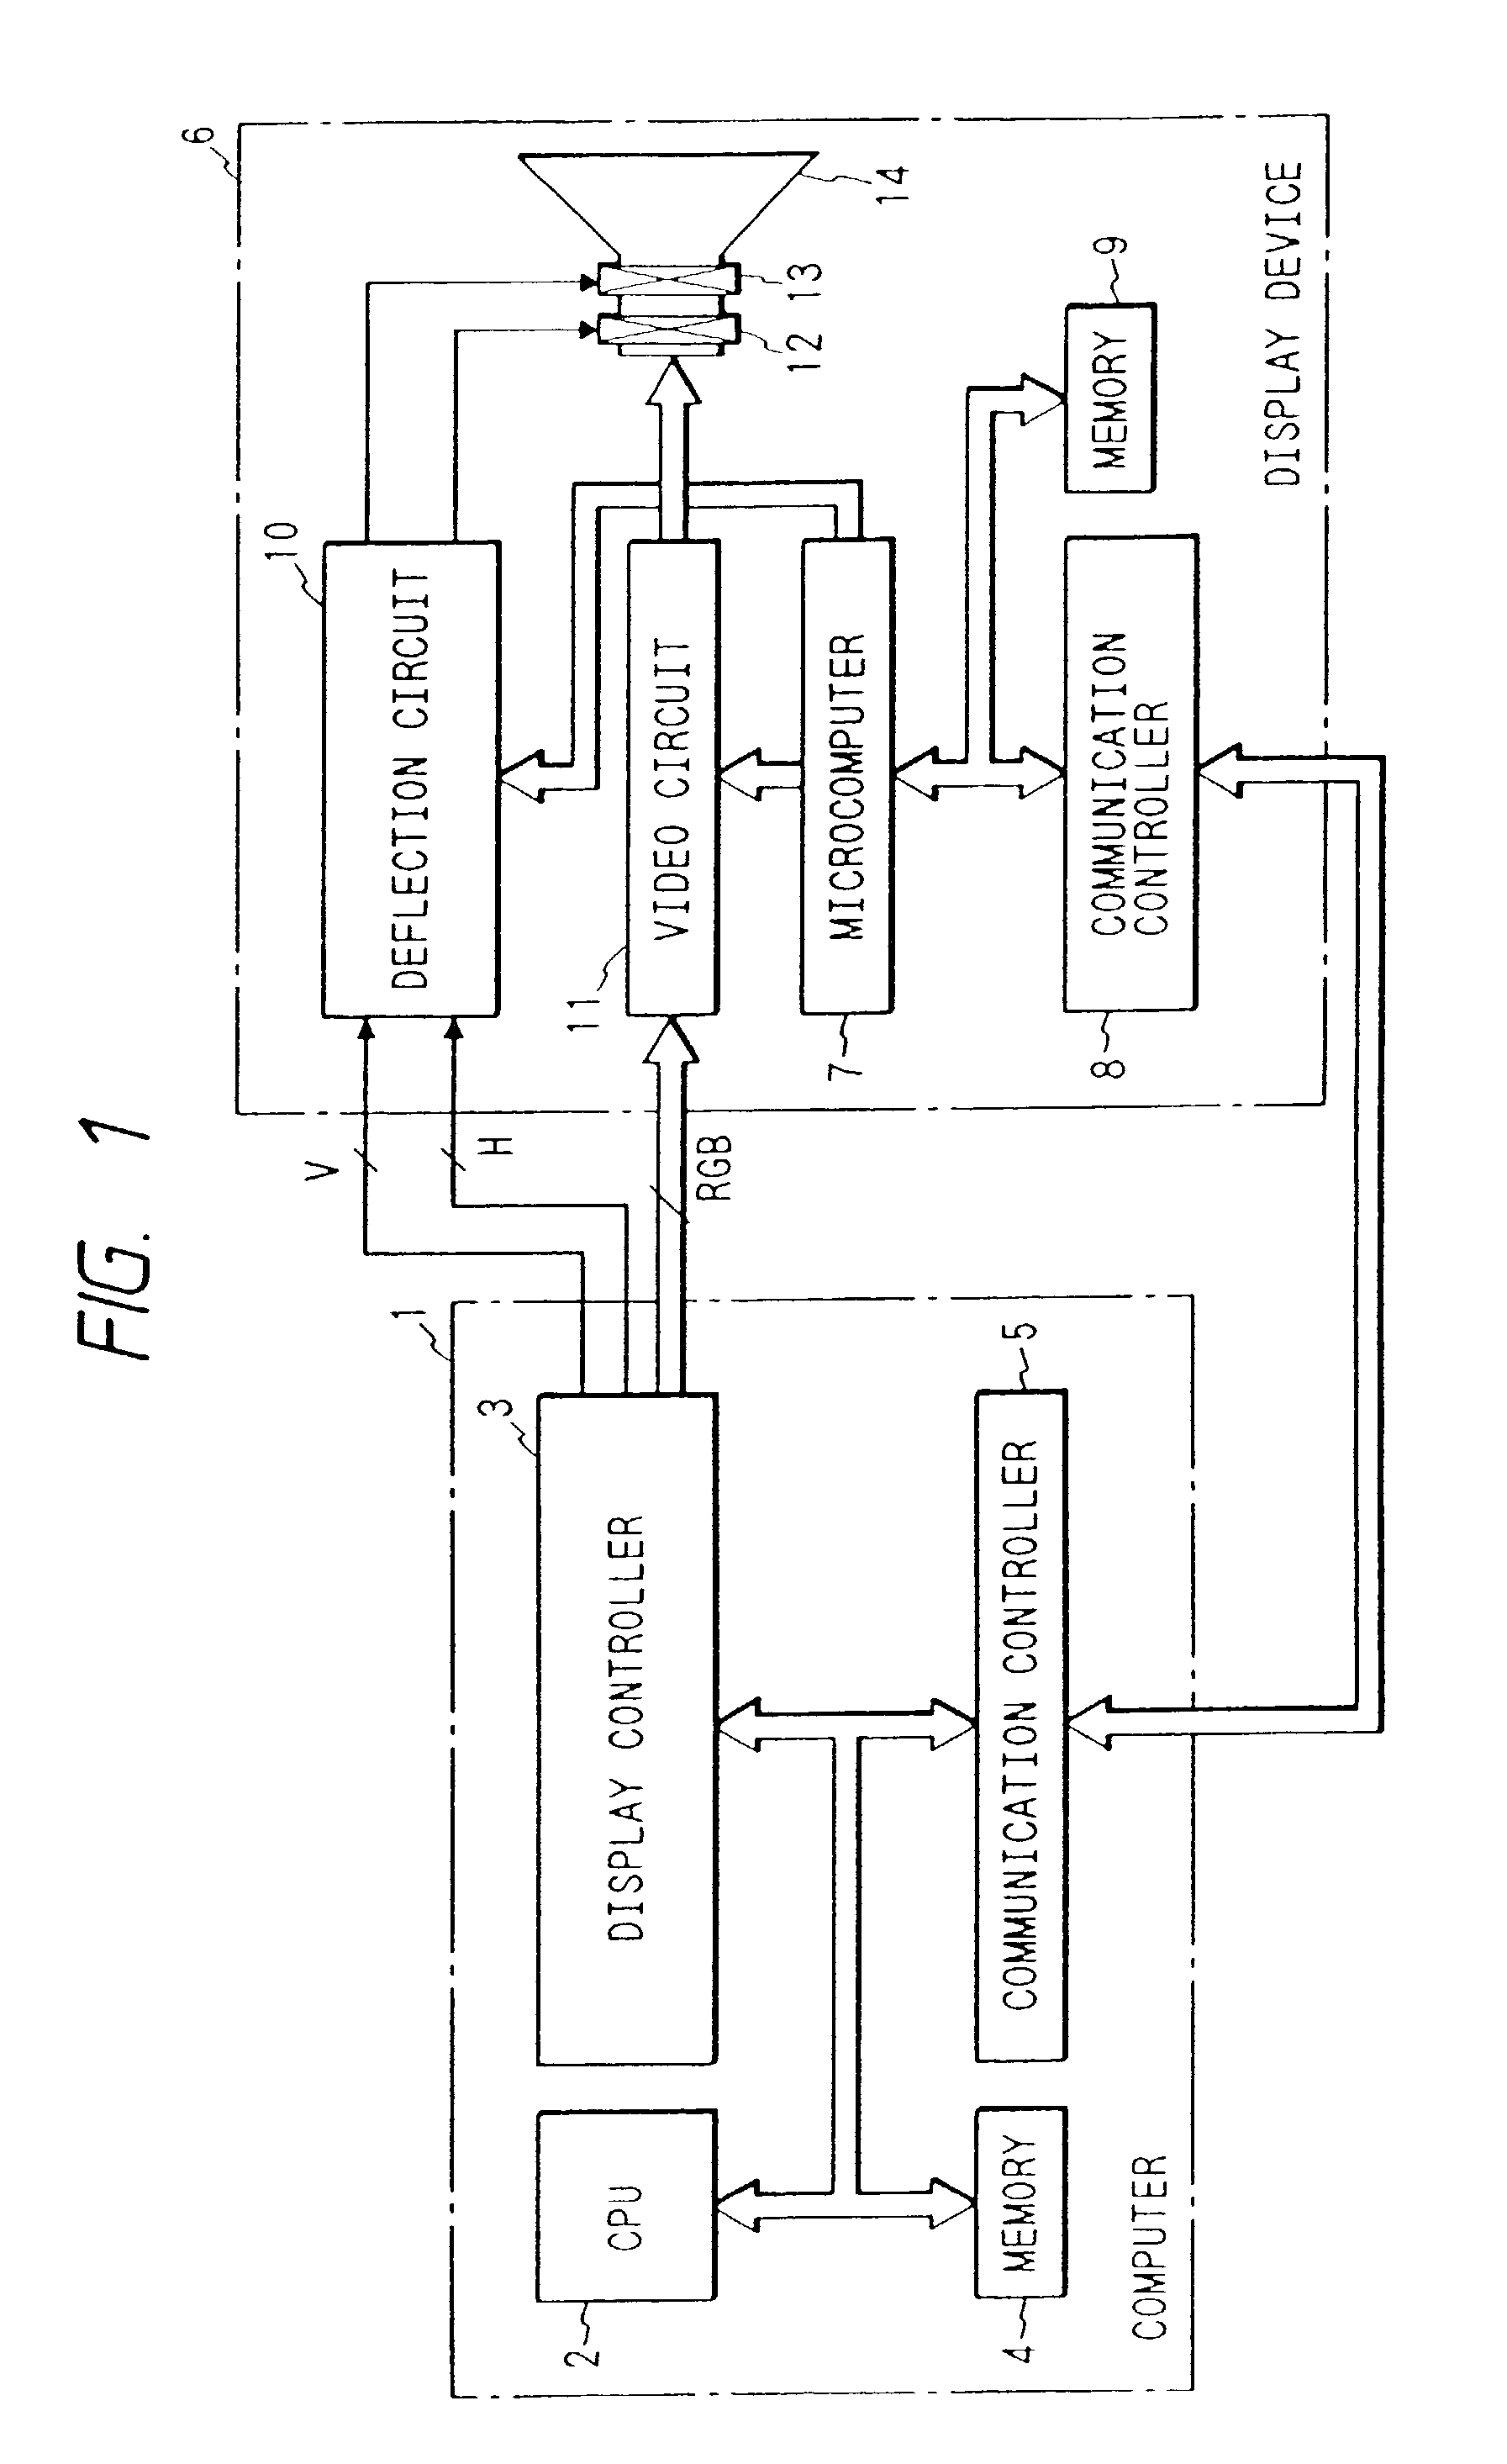 Display unit with processor and communication controller which communicates information to the processor